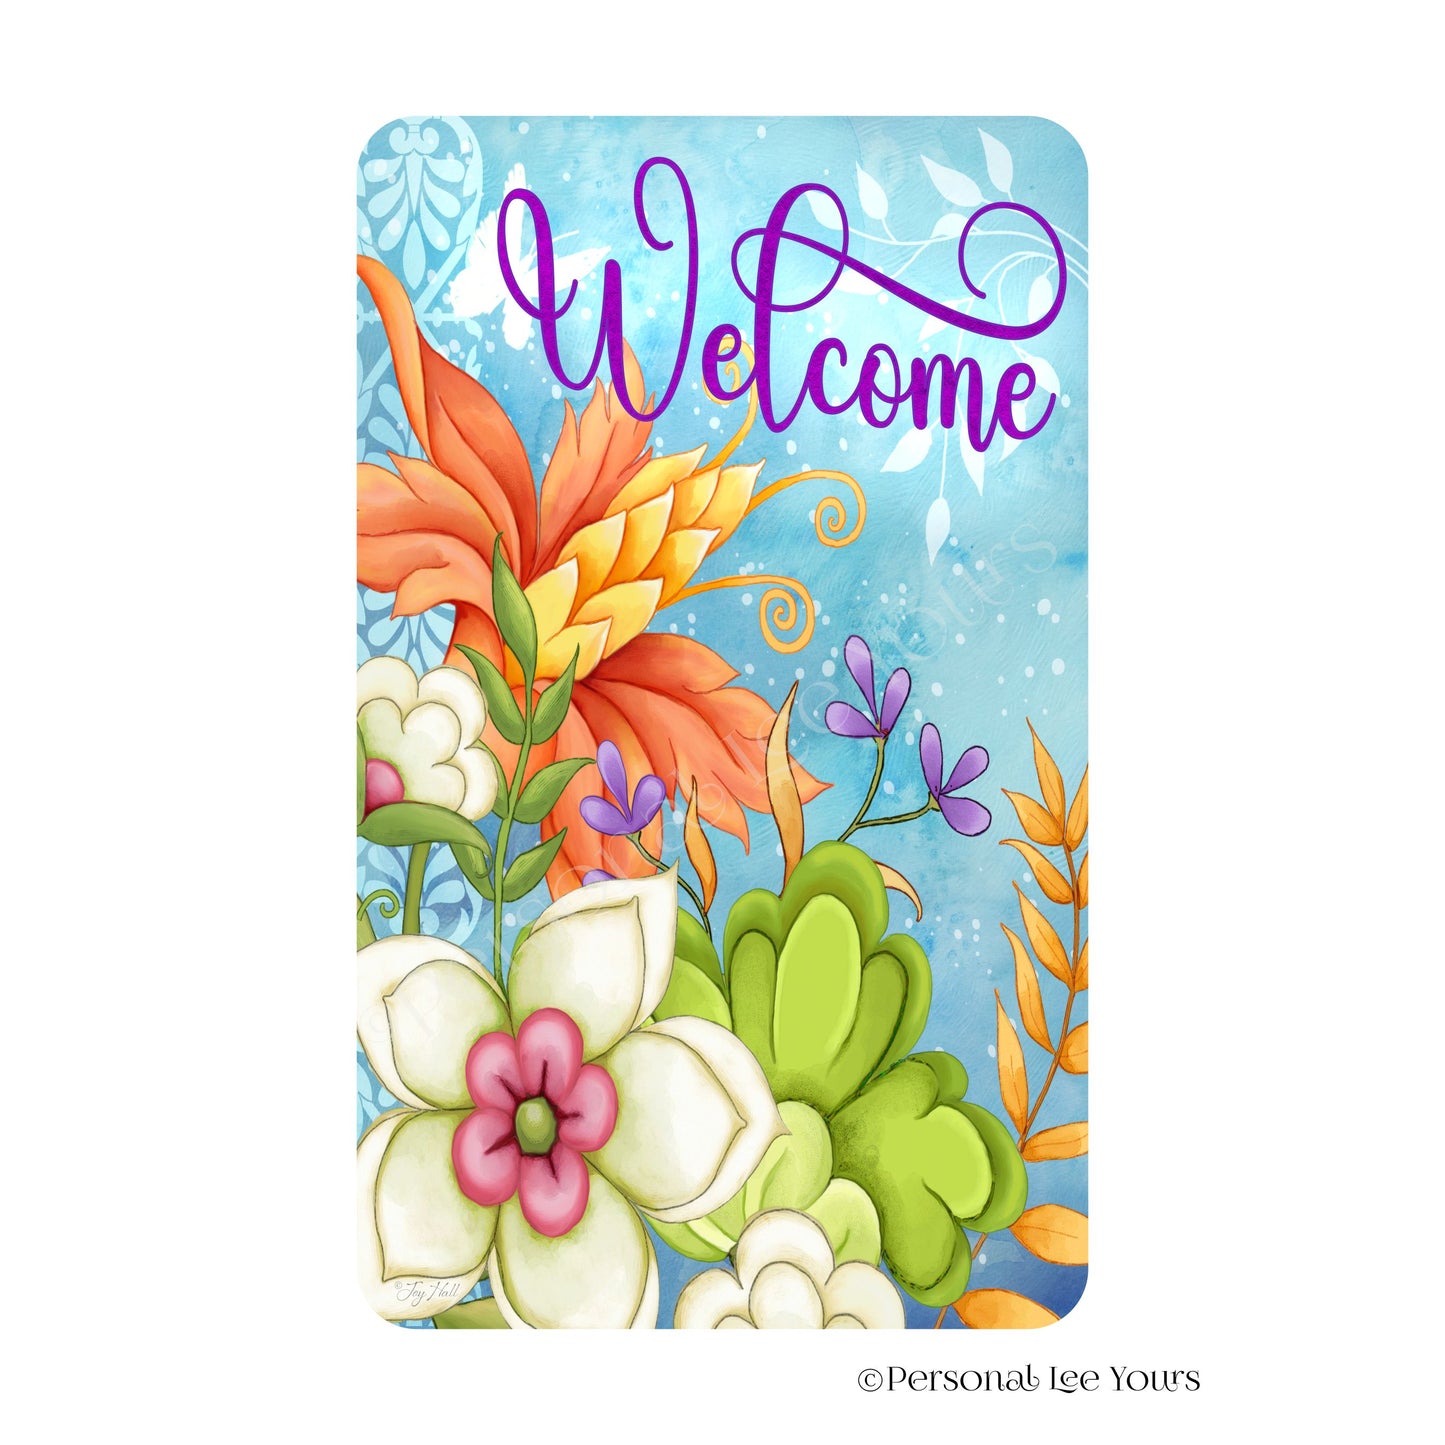 Copy of Joy Hall Exclusive Sign * Bright Flowers Welcome * Vertical * Lightweight Metal